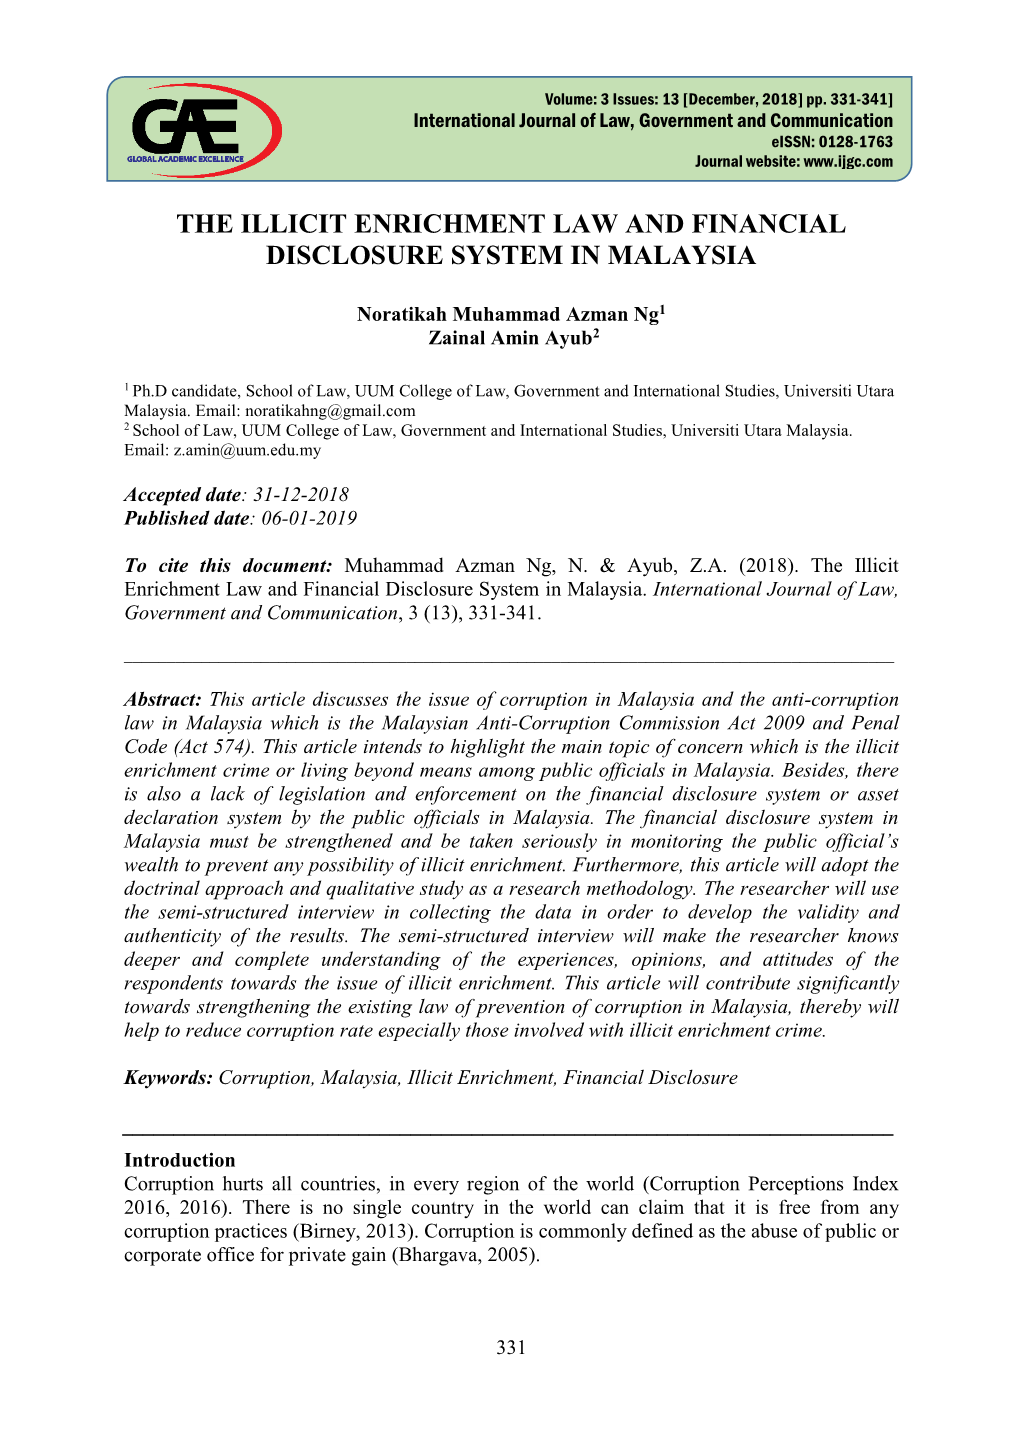 The Illicit Enrichment Law and Financial Disclosure System in Malaysia